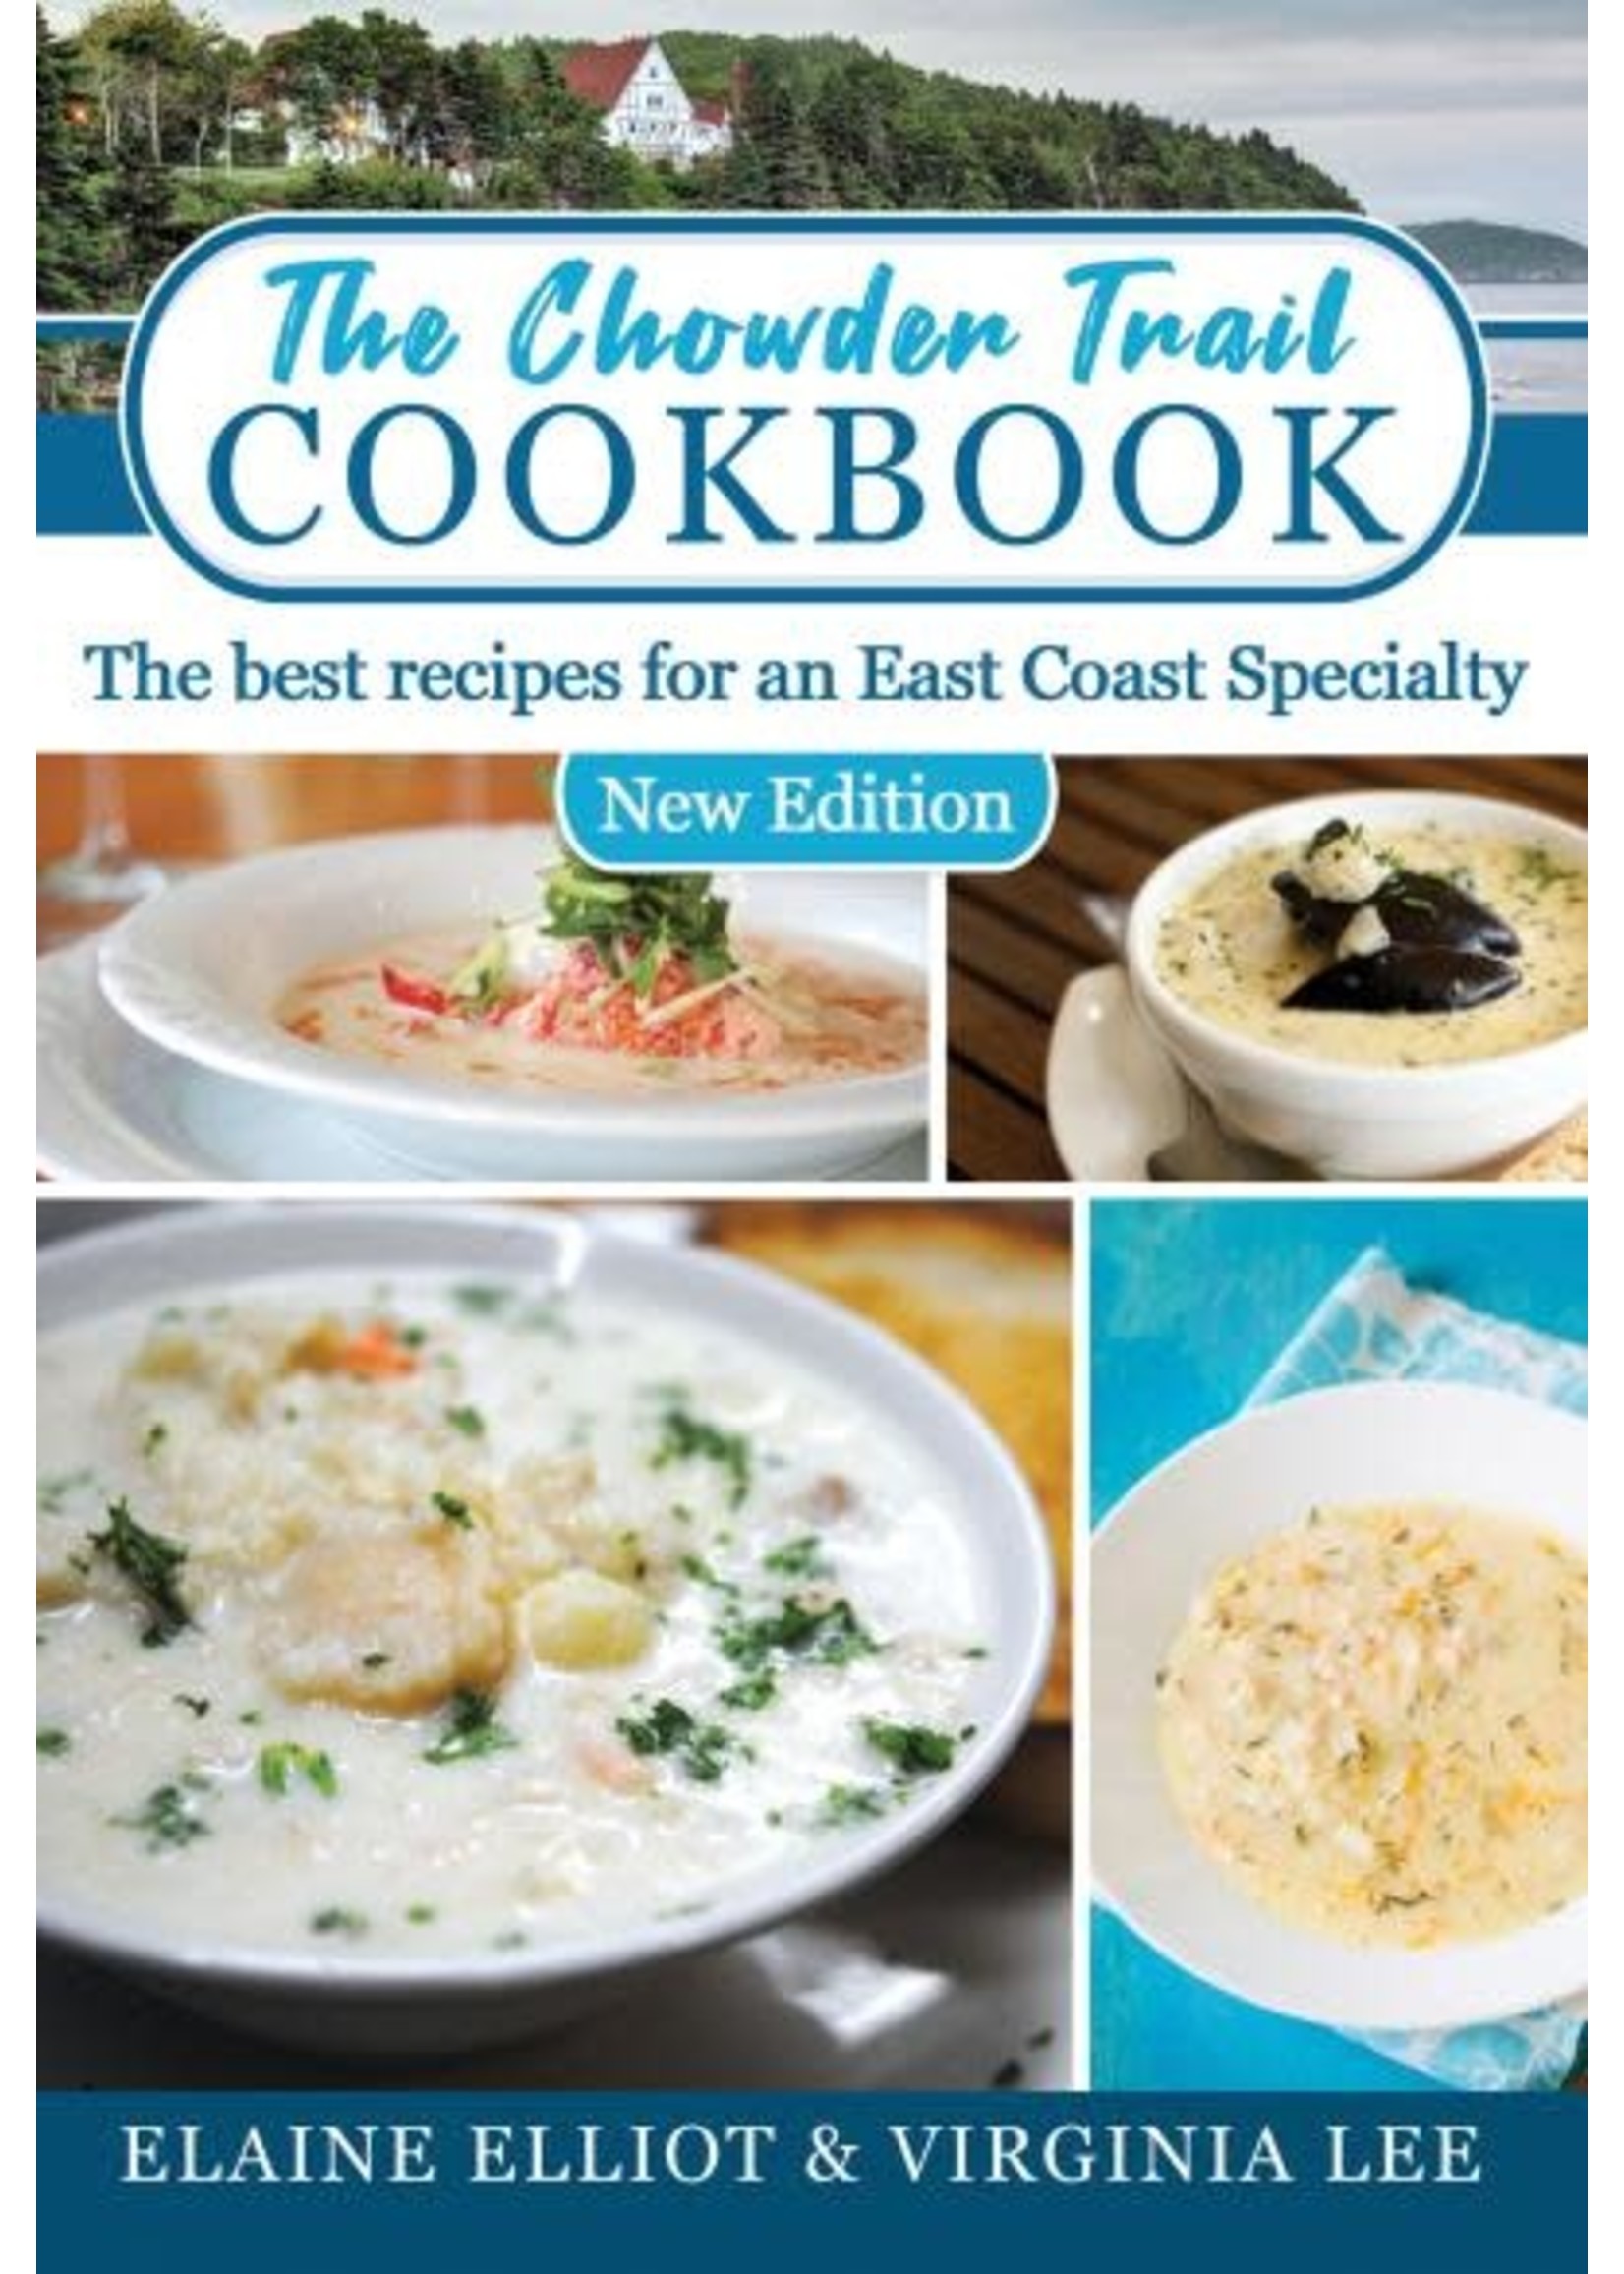 The Chowder Trail Cookbook :The best recipes for an East Coast Specialty, Second Edition by Elaine Elliot, Virginia Lee